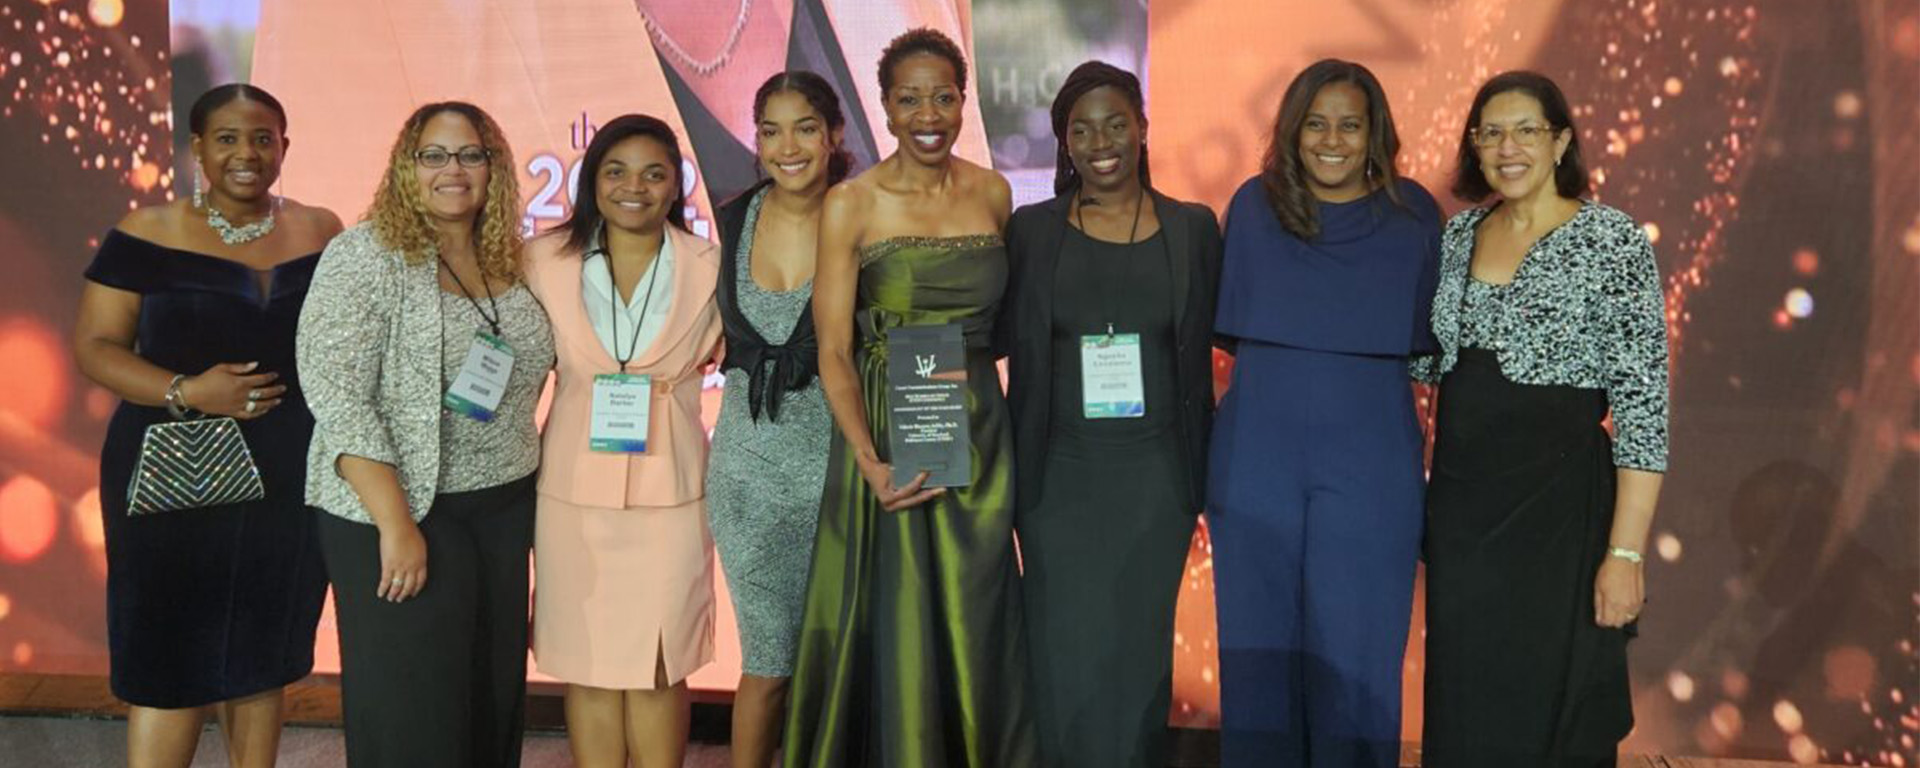 Women of Color Awards attendees